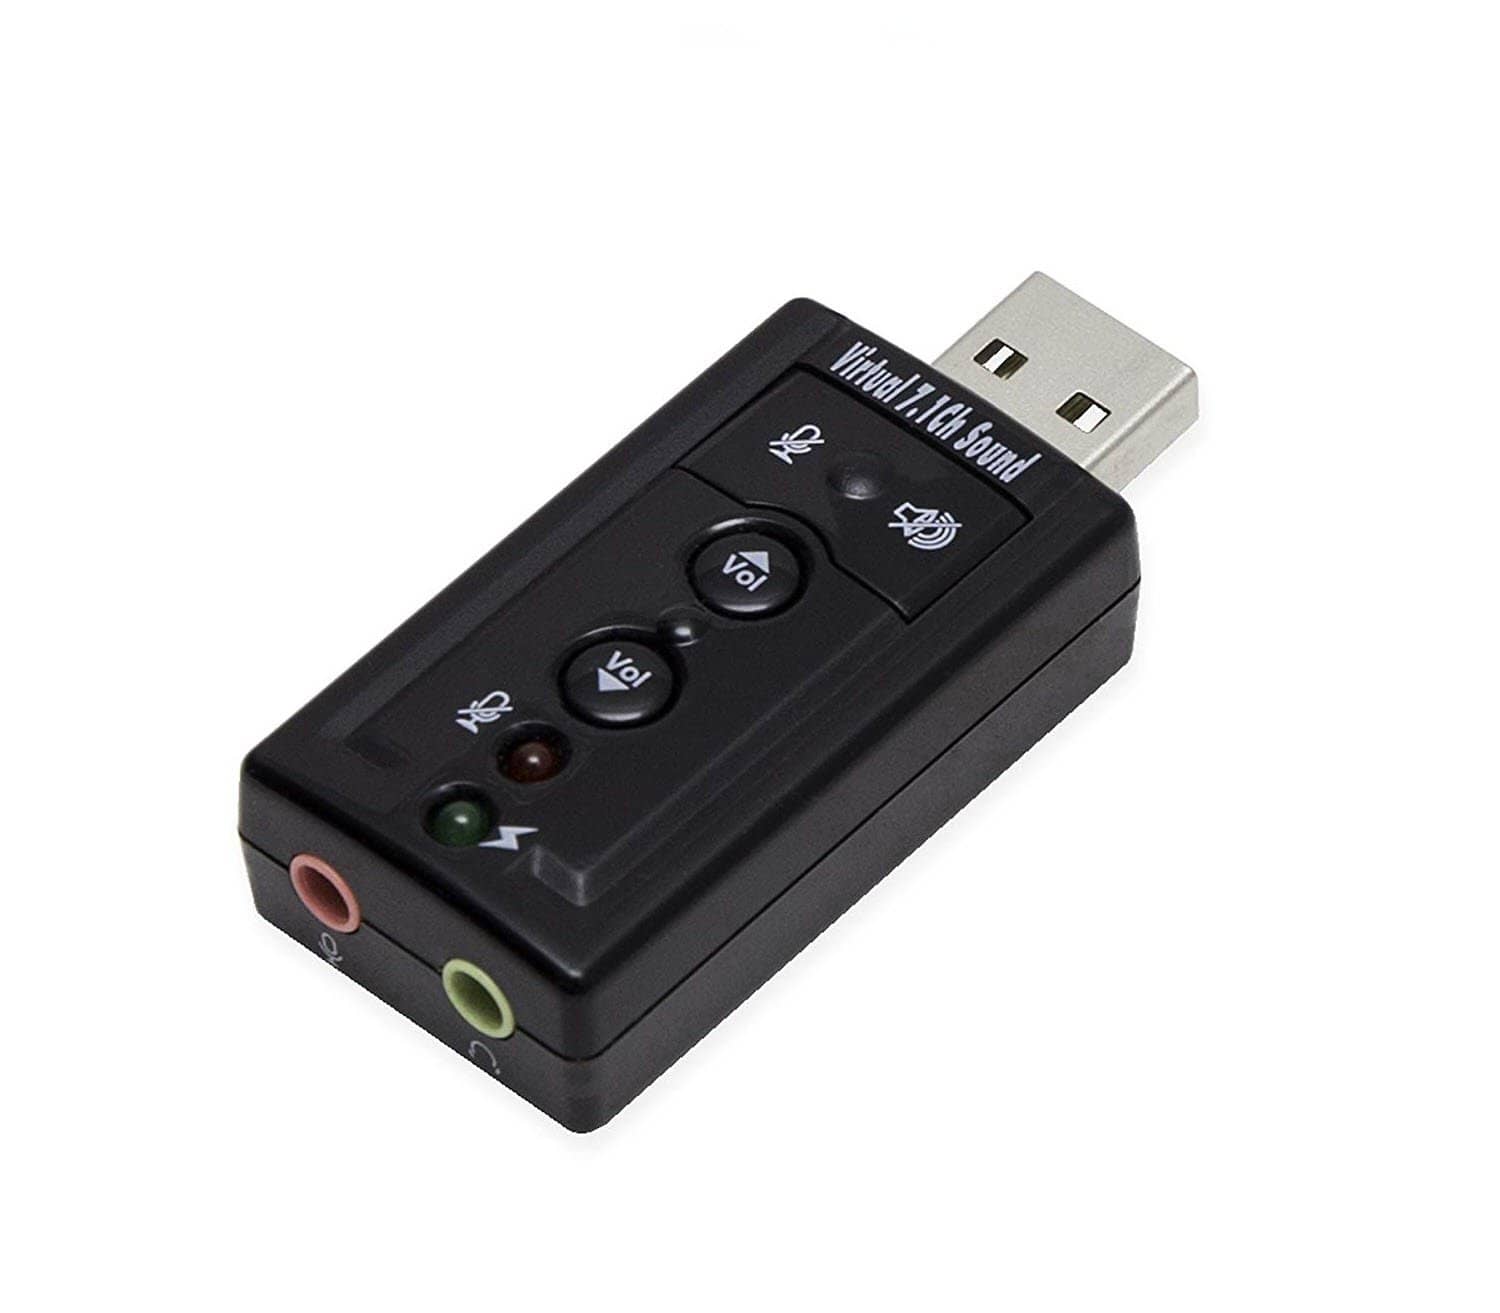 SYBA USB 2.0 External Stereo Sound Adapter Optical SPDIF Output Audio Dongle